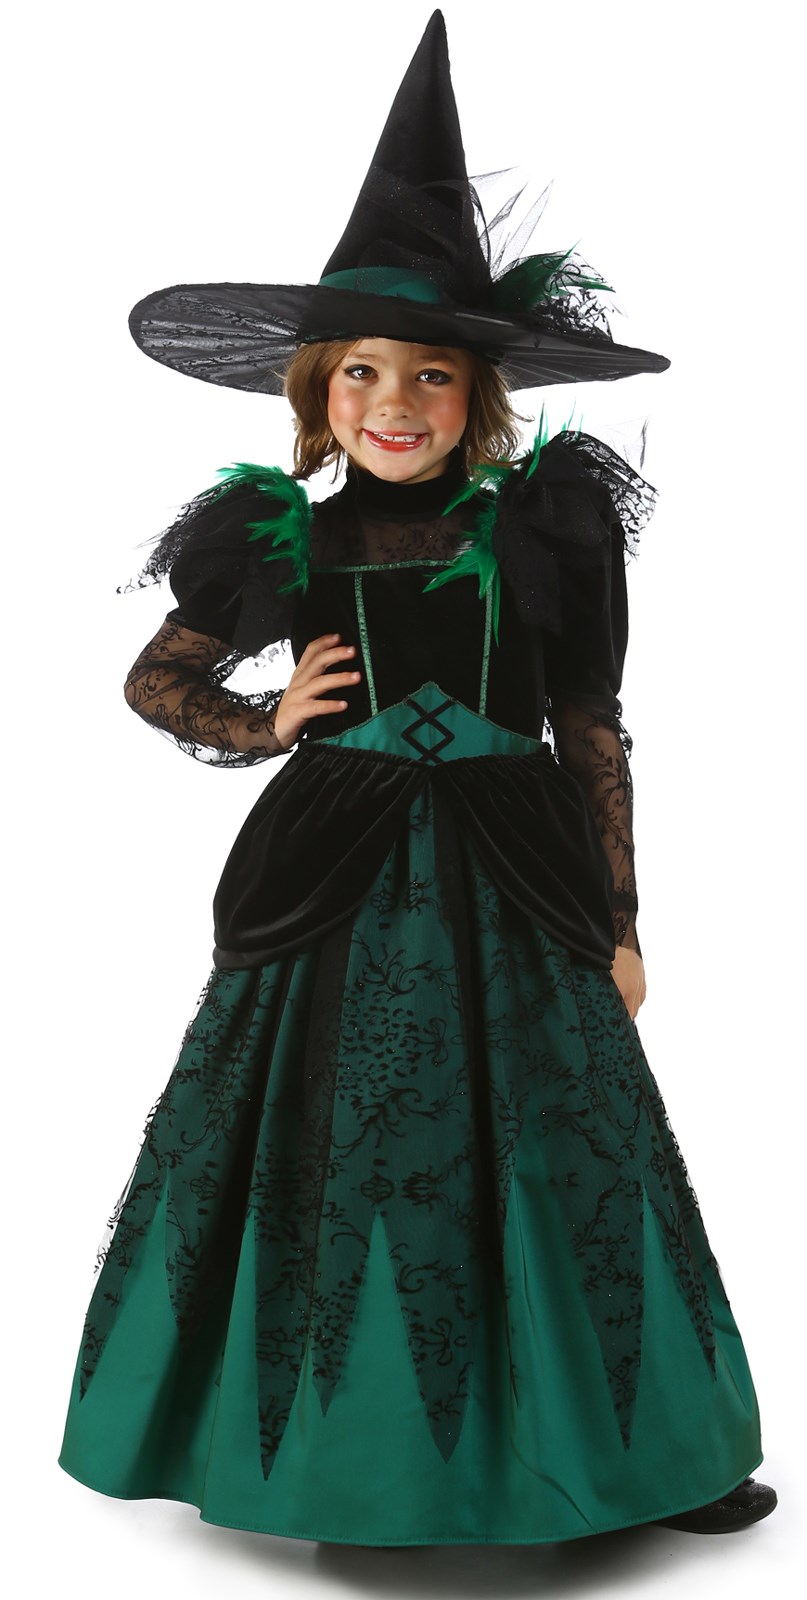 Wizard of Oz Pocket Deluxe Wicked Witch of the West Costume